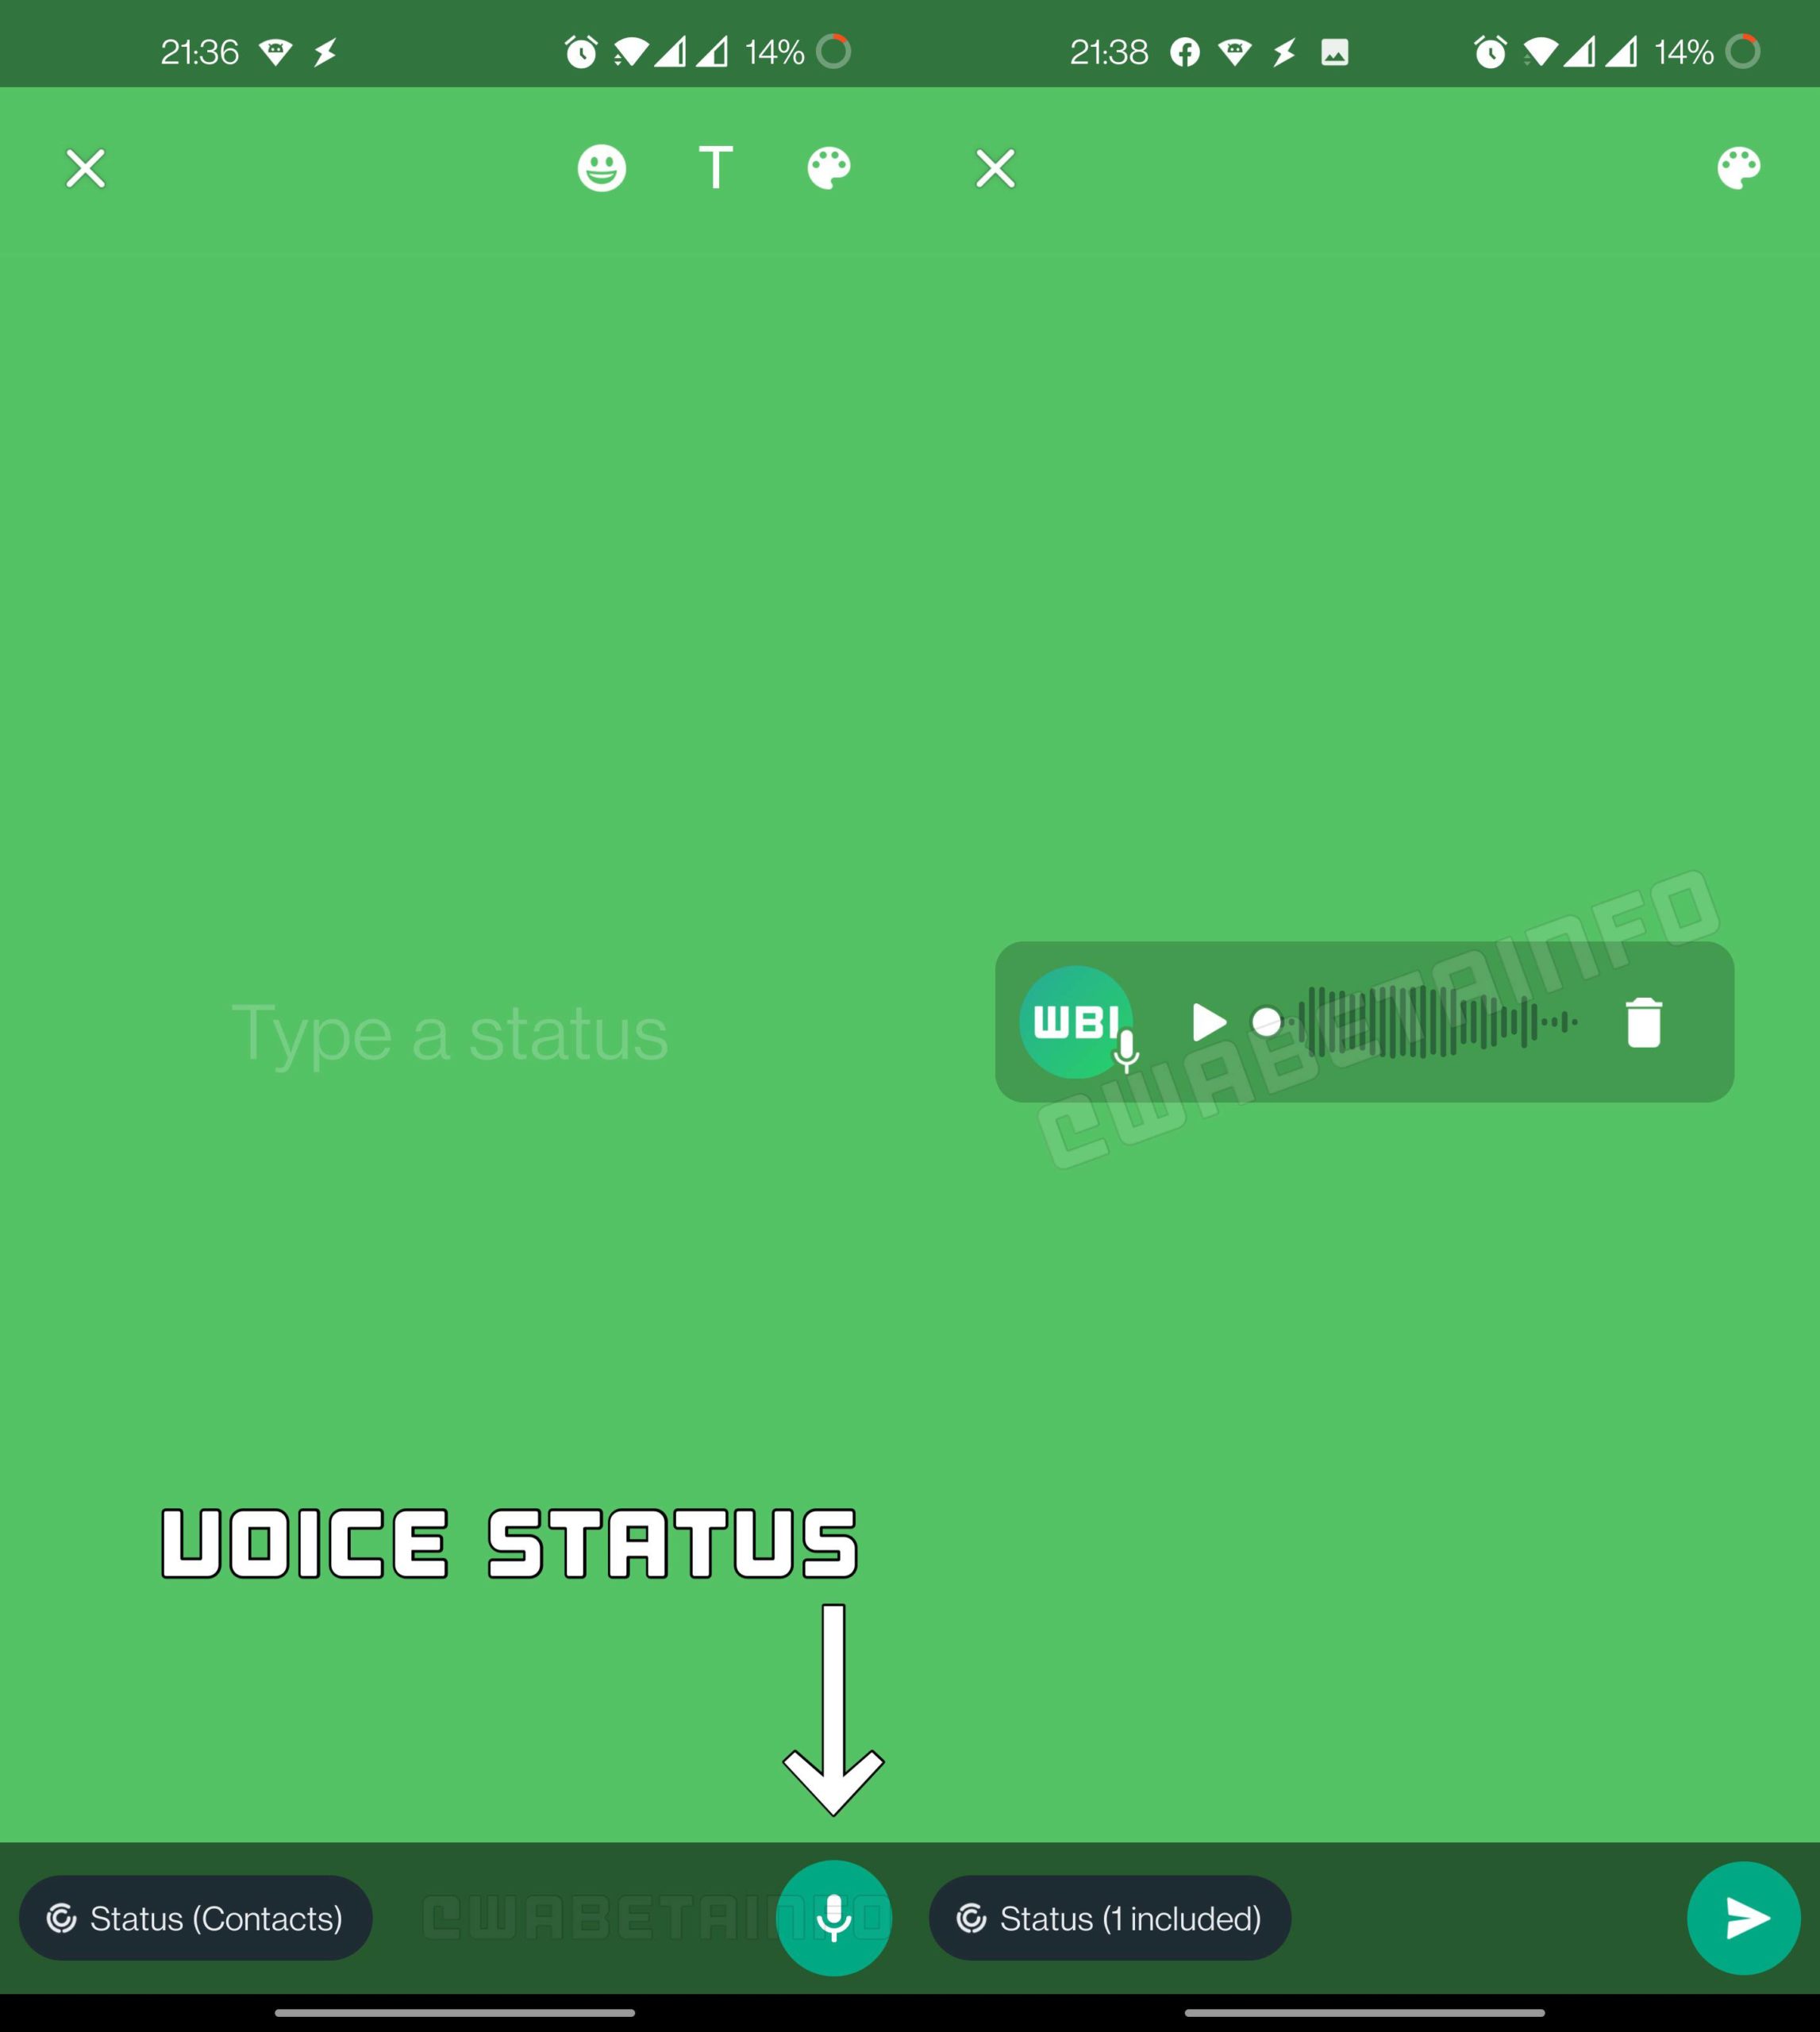 WhatsApp voice messages story iphone android launch